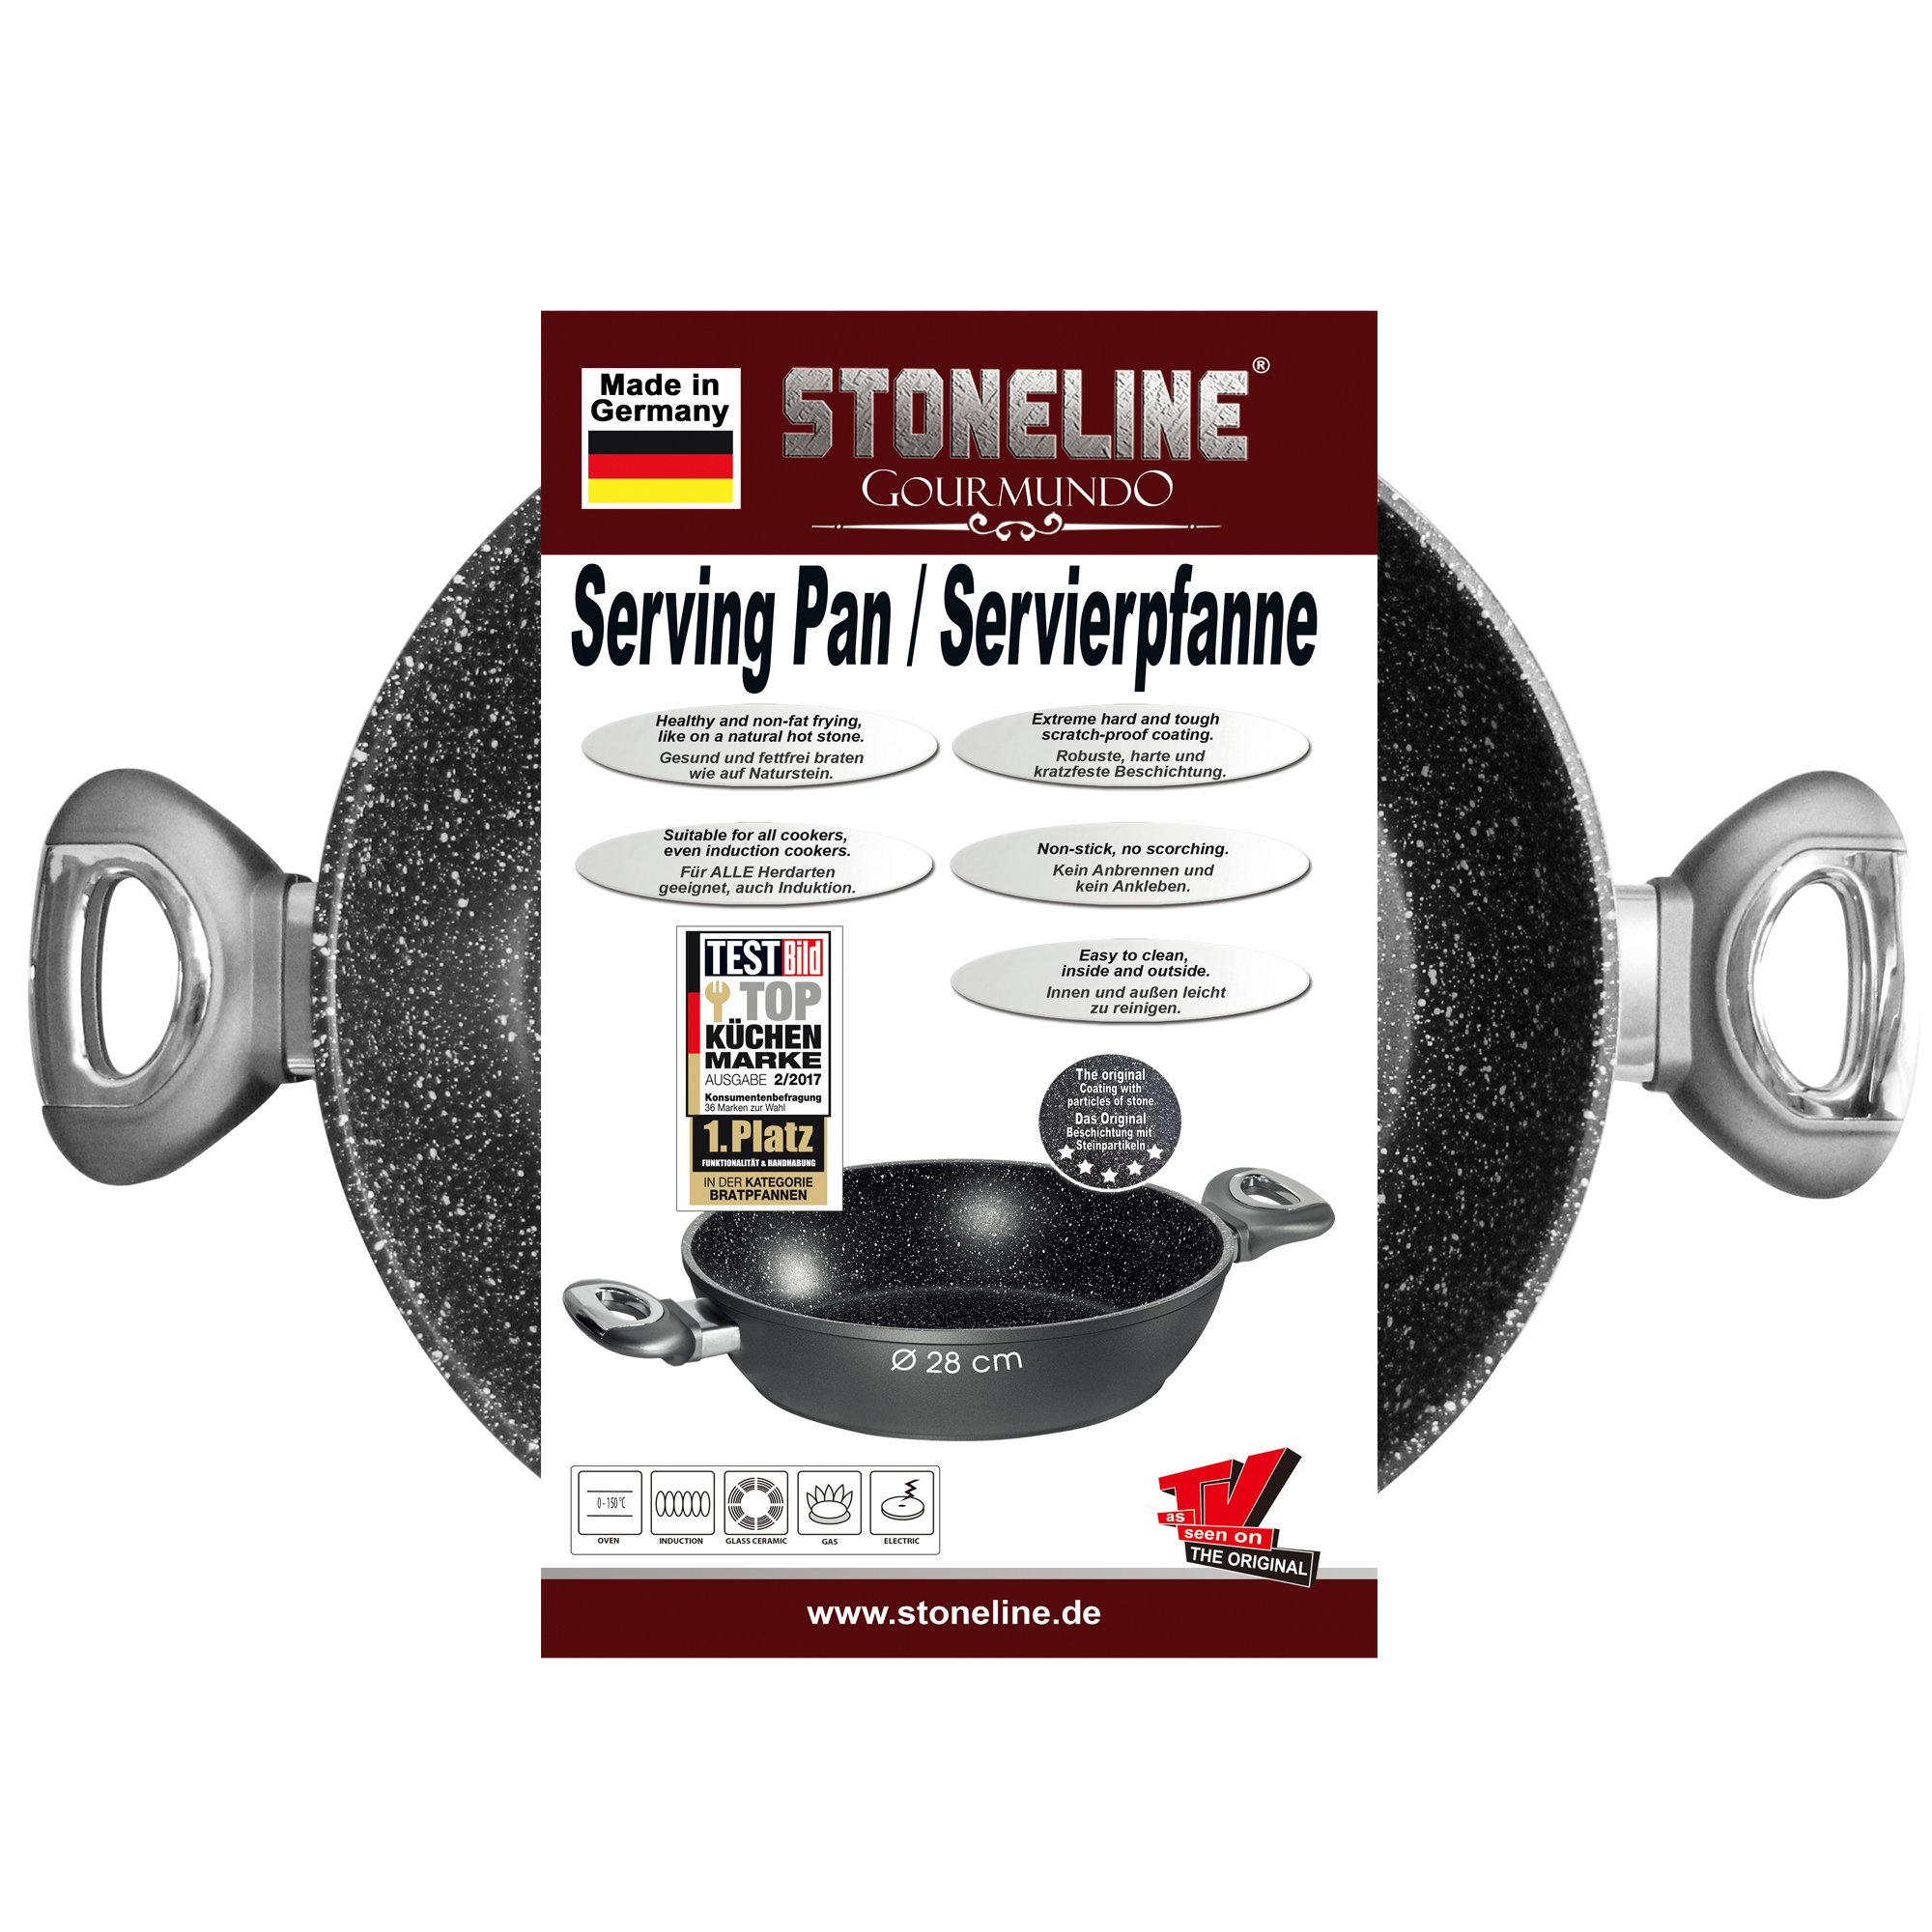 STONELINE® Gourmundo serving pan 28 cm, Made in Germany, induction and oven-safe